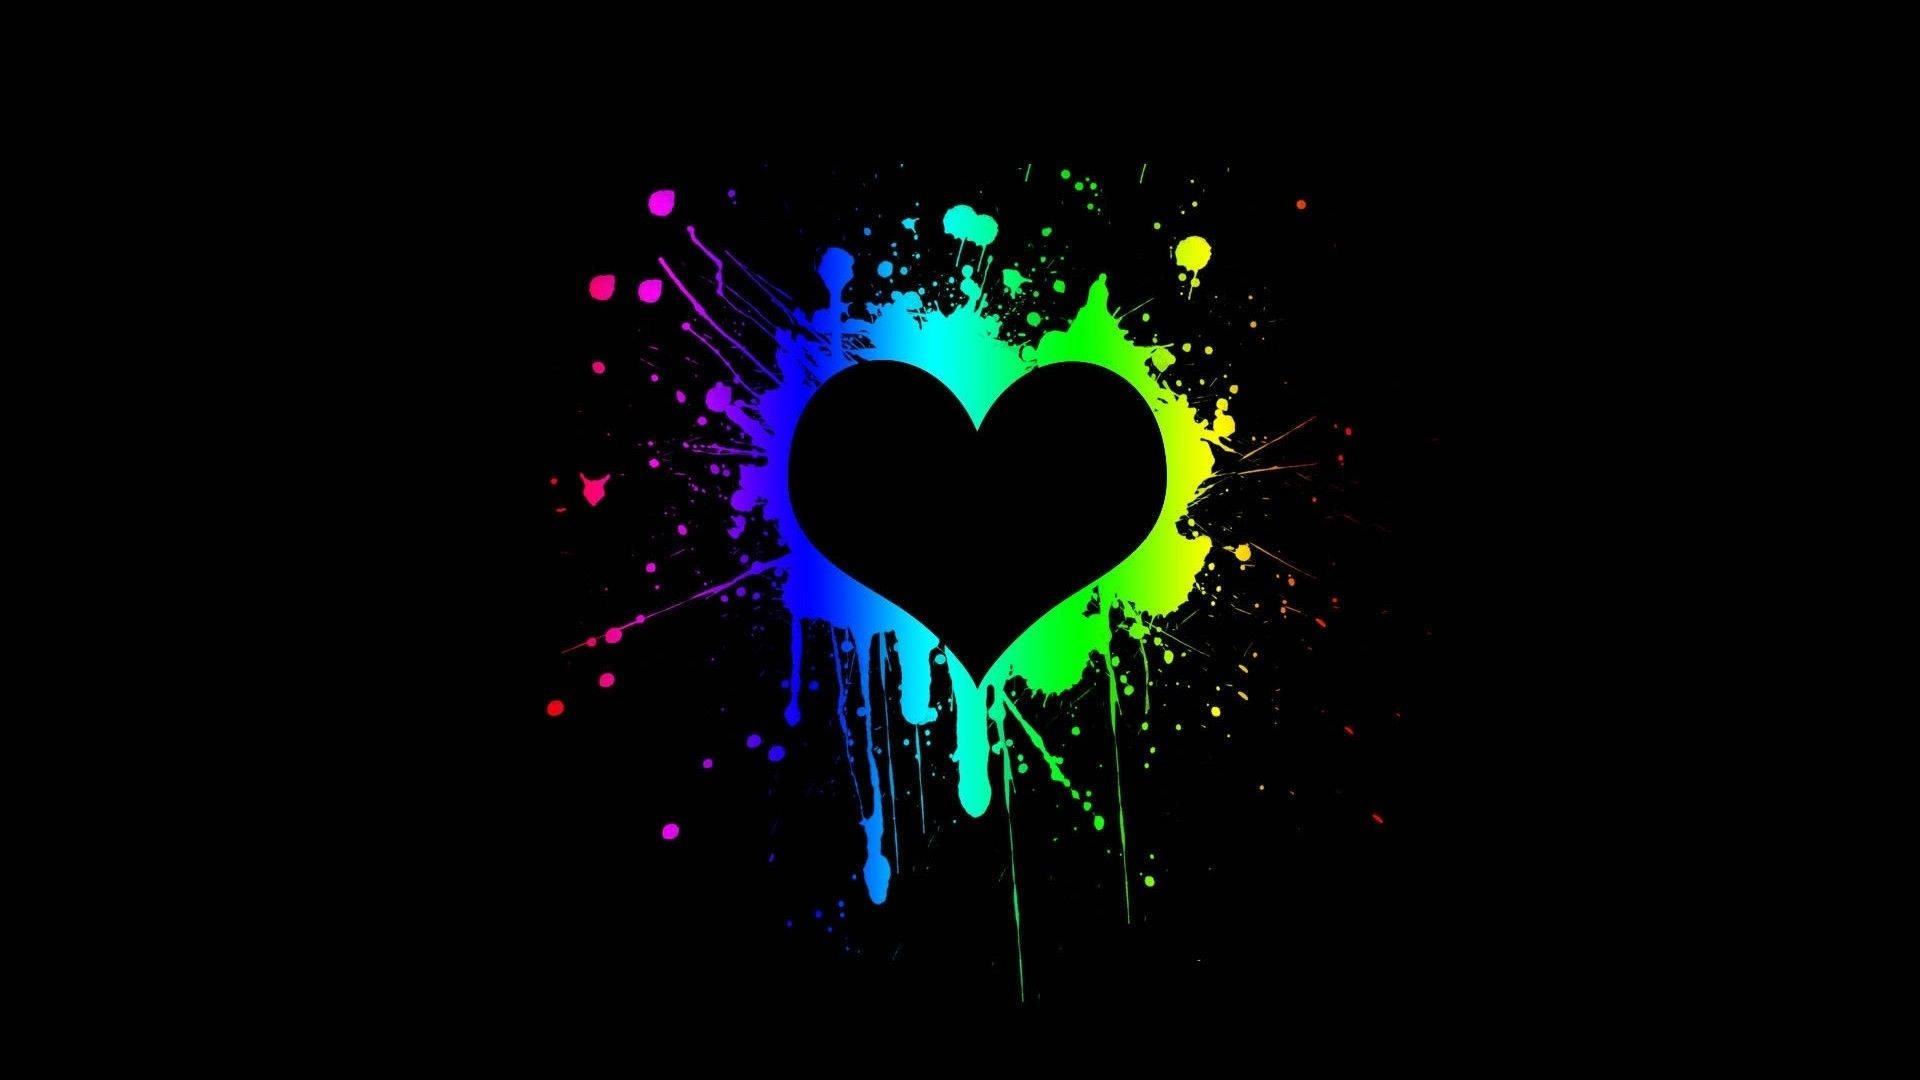 Mysterious Black Heart Imprinted With Paint Splashes Background